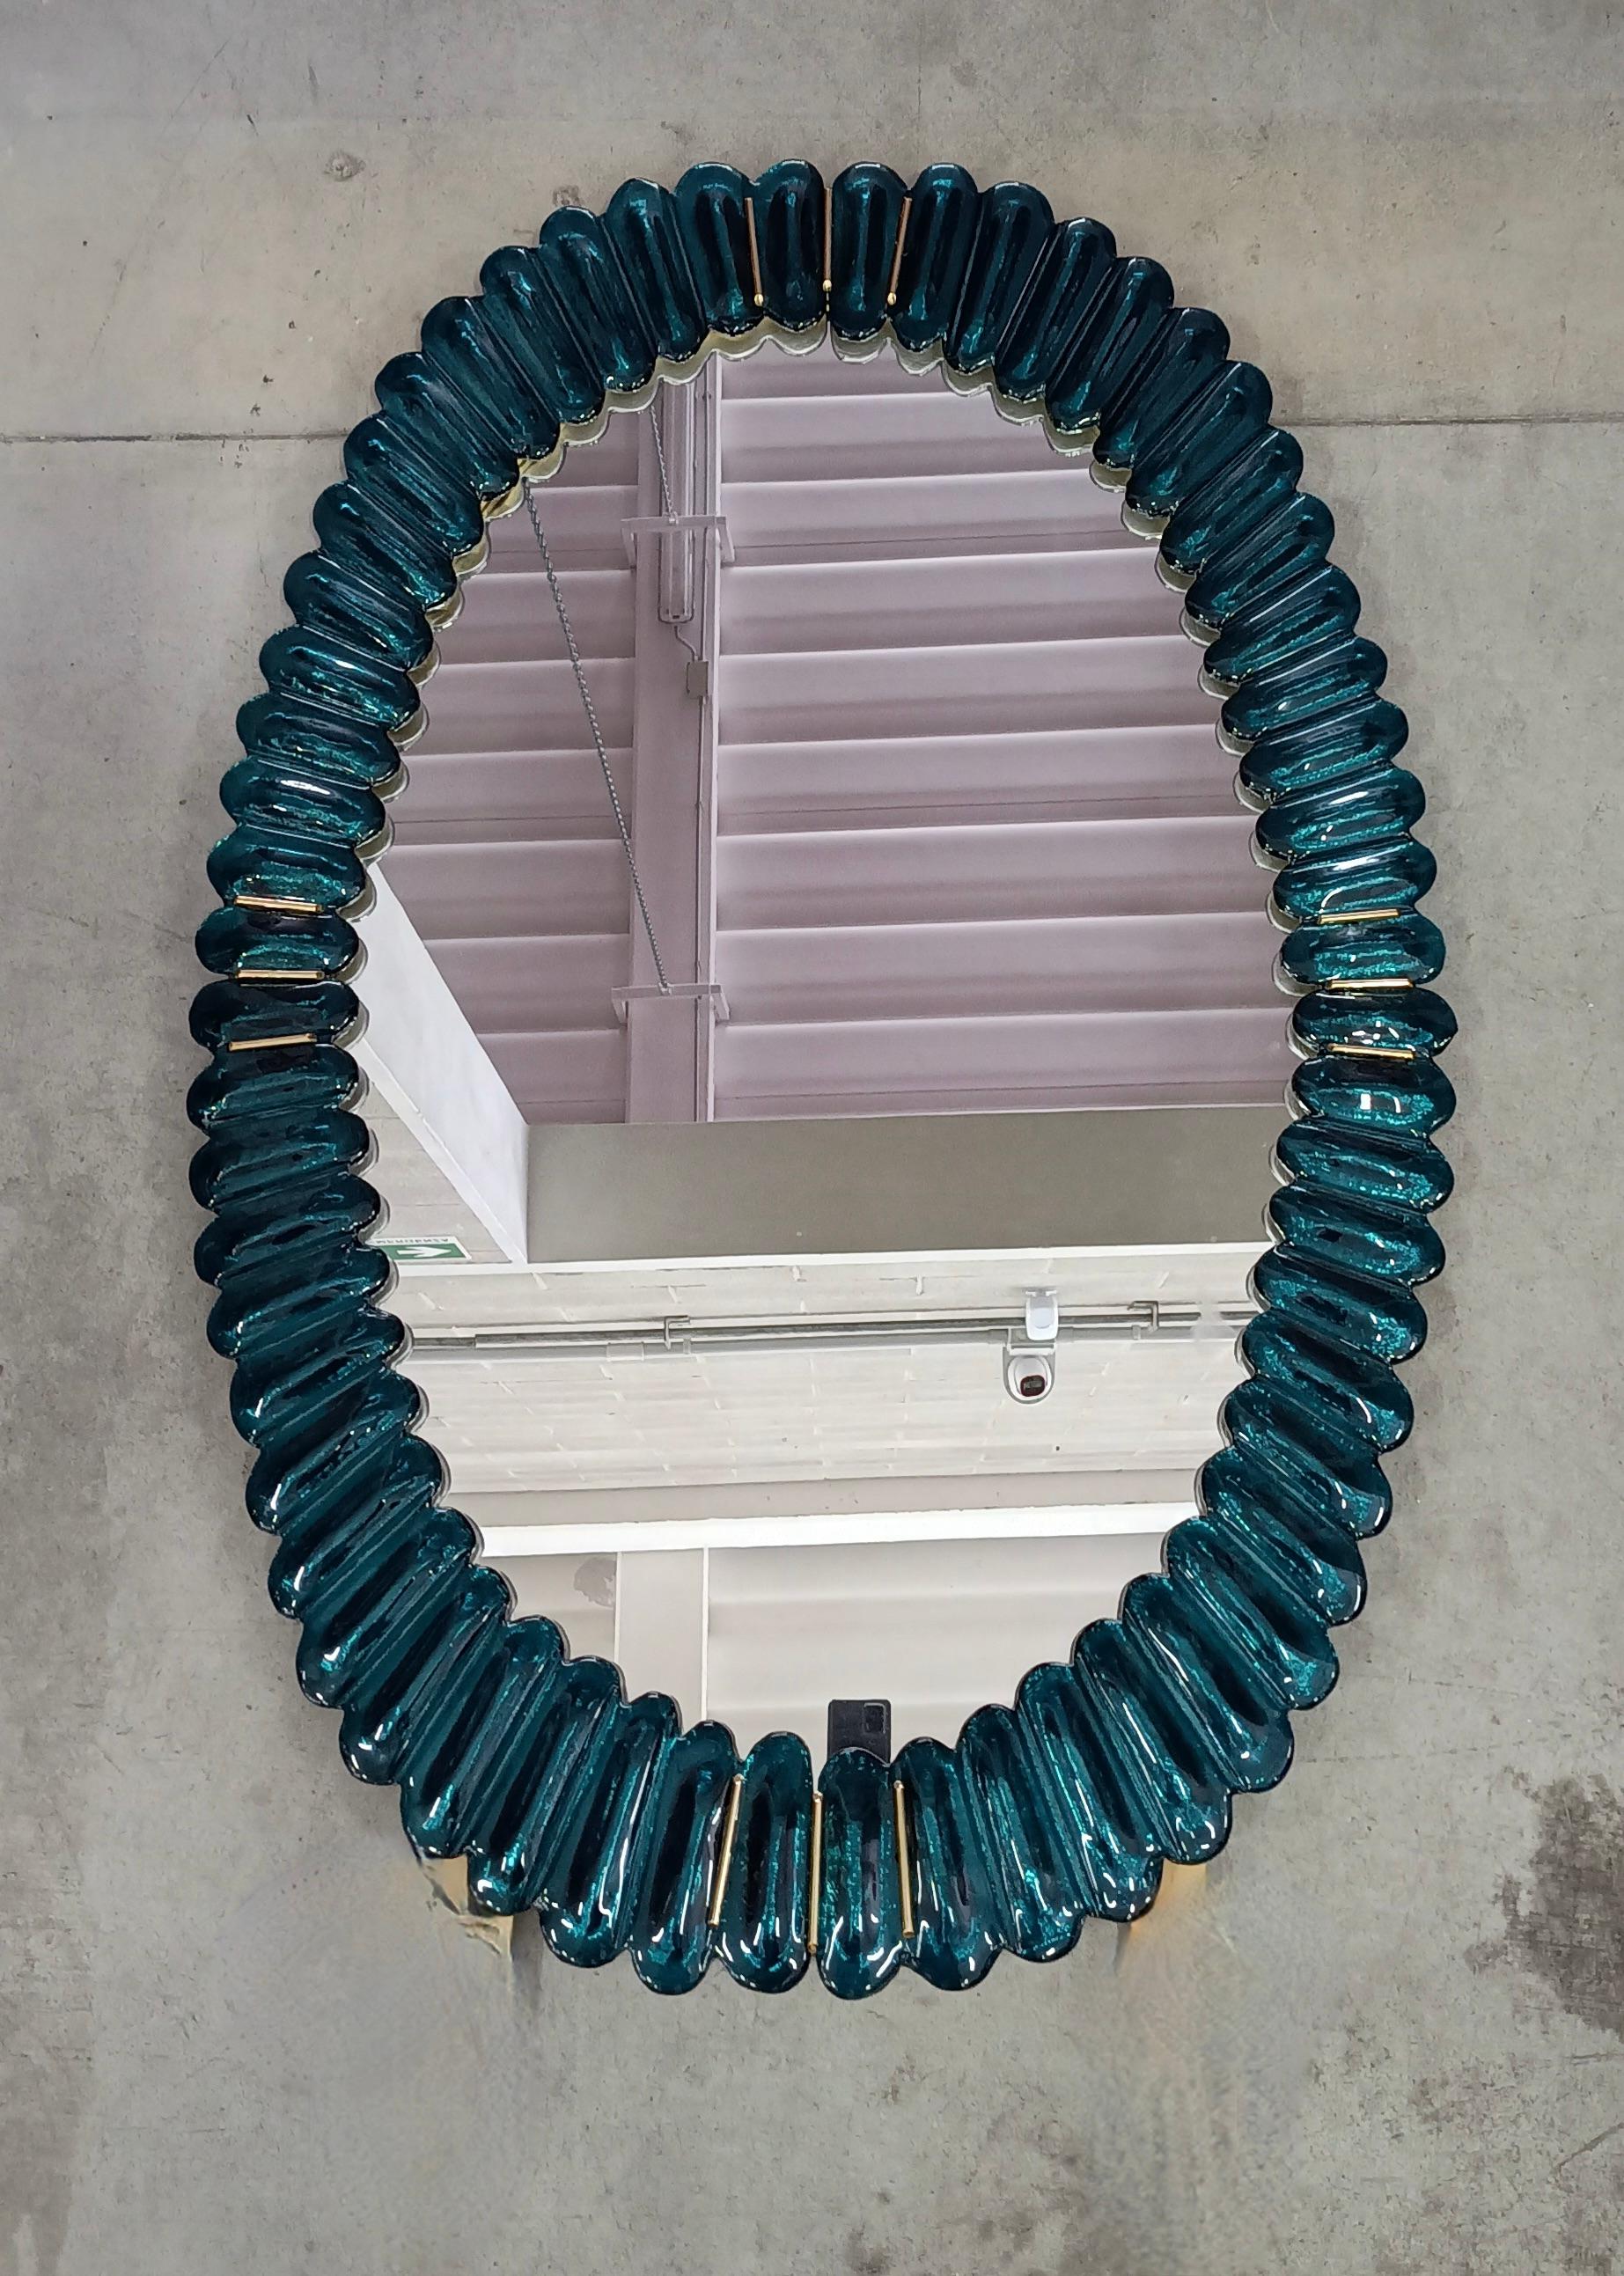 Stunning mirror in blazing aquamarine blue color Murano glass, Venice. A mirror that alone will furnish your home environment.

The mirror has a rear structure in wood, on which four Murano aquamarine blue glass sections are mounted to form an oval